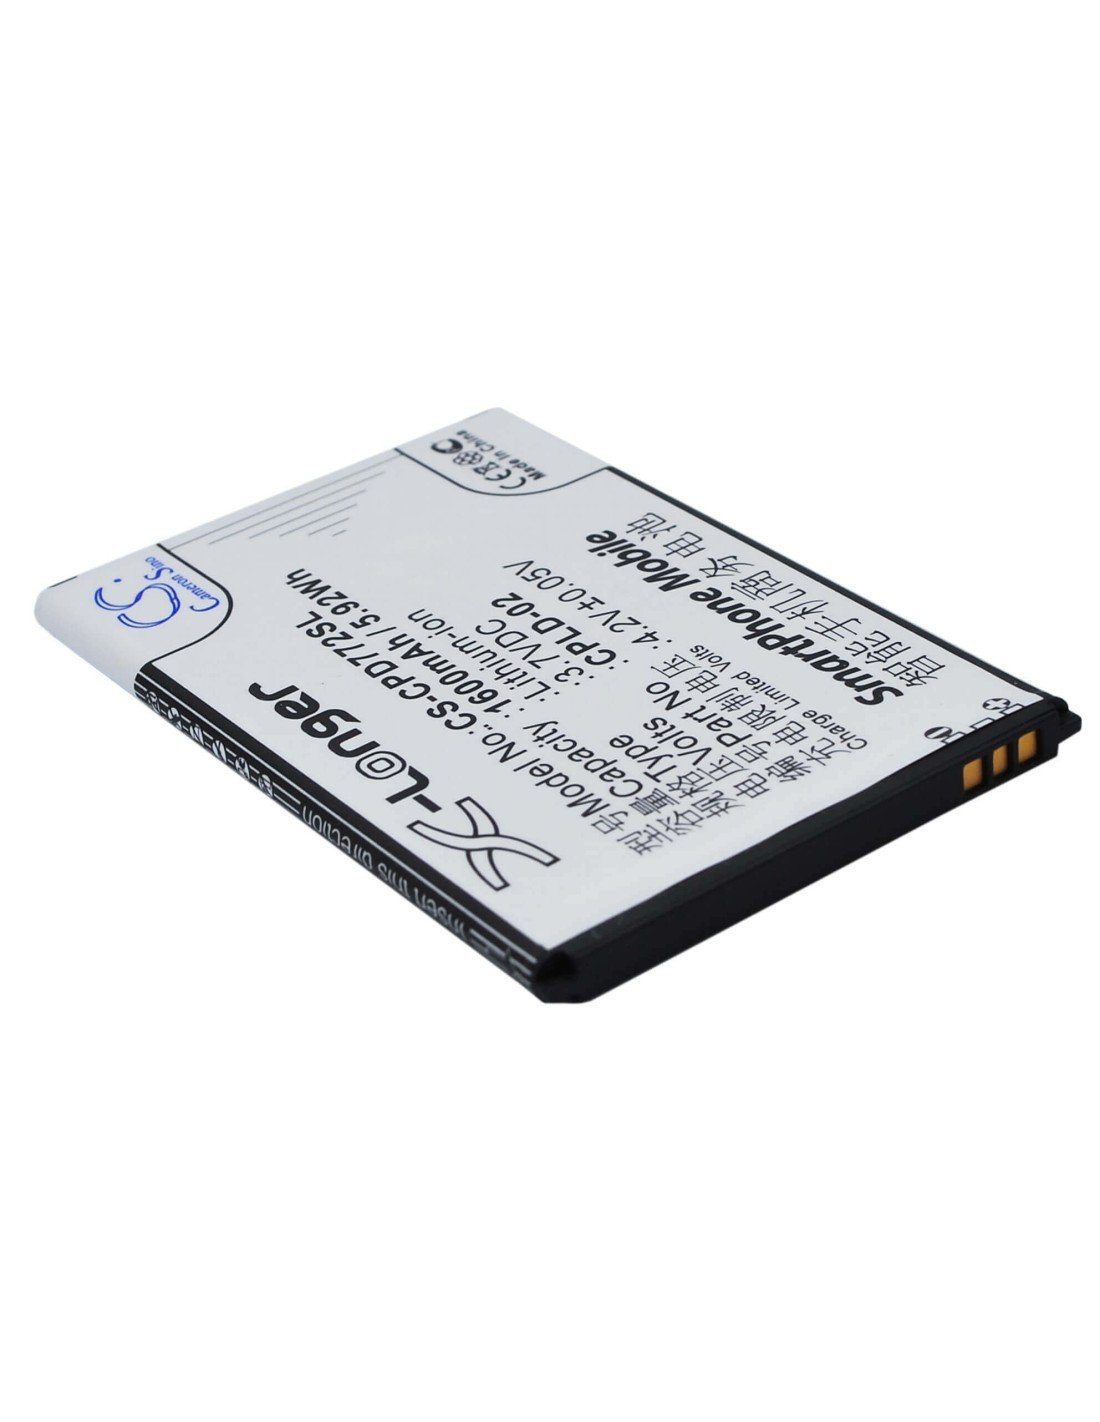 Battery for Coolpad 7728 3.7V, 1600mAh - 5.92Wh